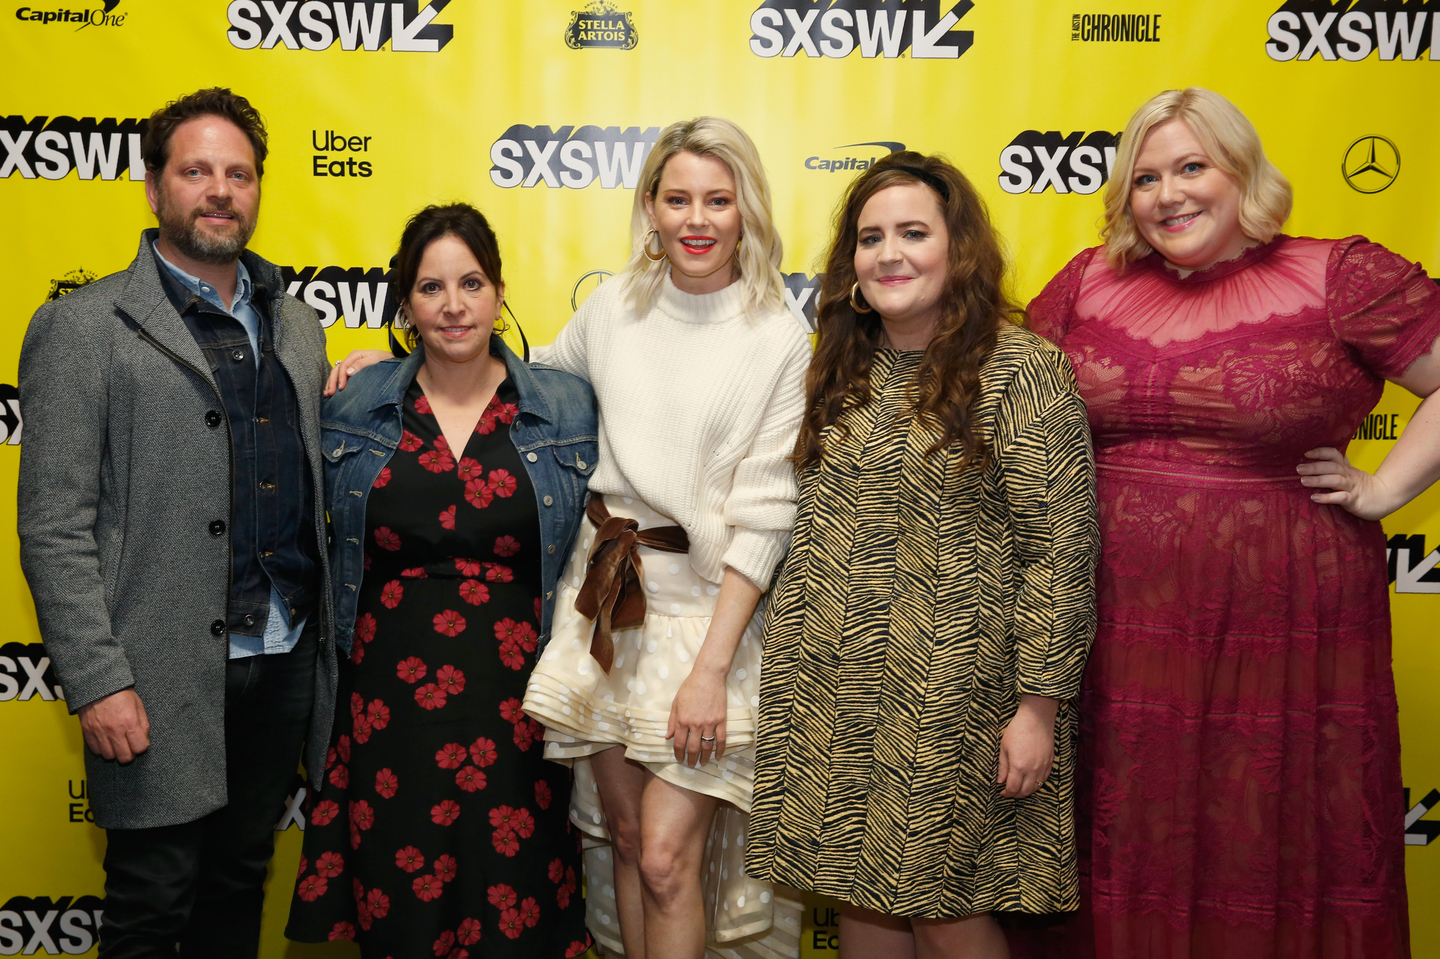 (L-R) Max Handelman, Alexandra Rushfield, Elizabeth Banks, Aidy Bryant, and Lindy West at the Shrill World Premiere – Photo by Sean Mathis/Getty Images for SXSW